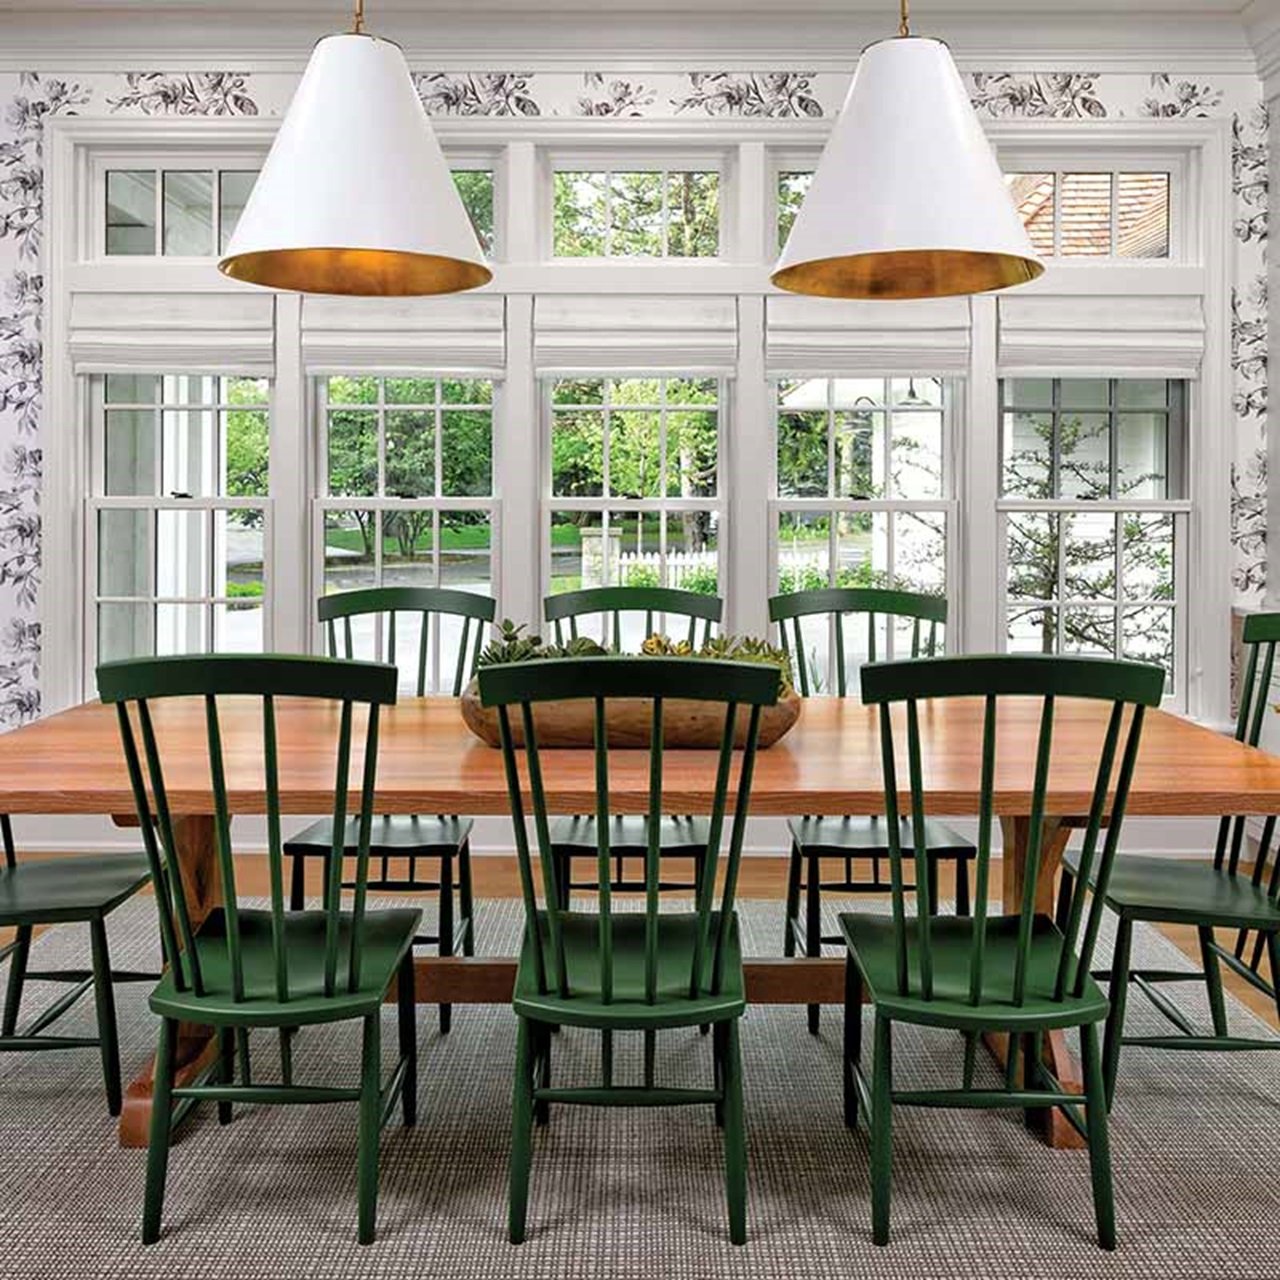 Dining Room With Signature Ultimate Double Hung Insert Windows